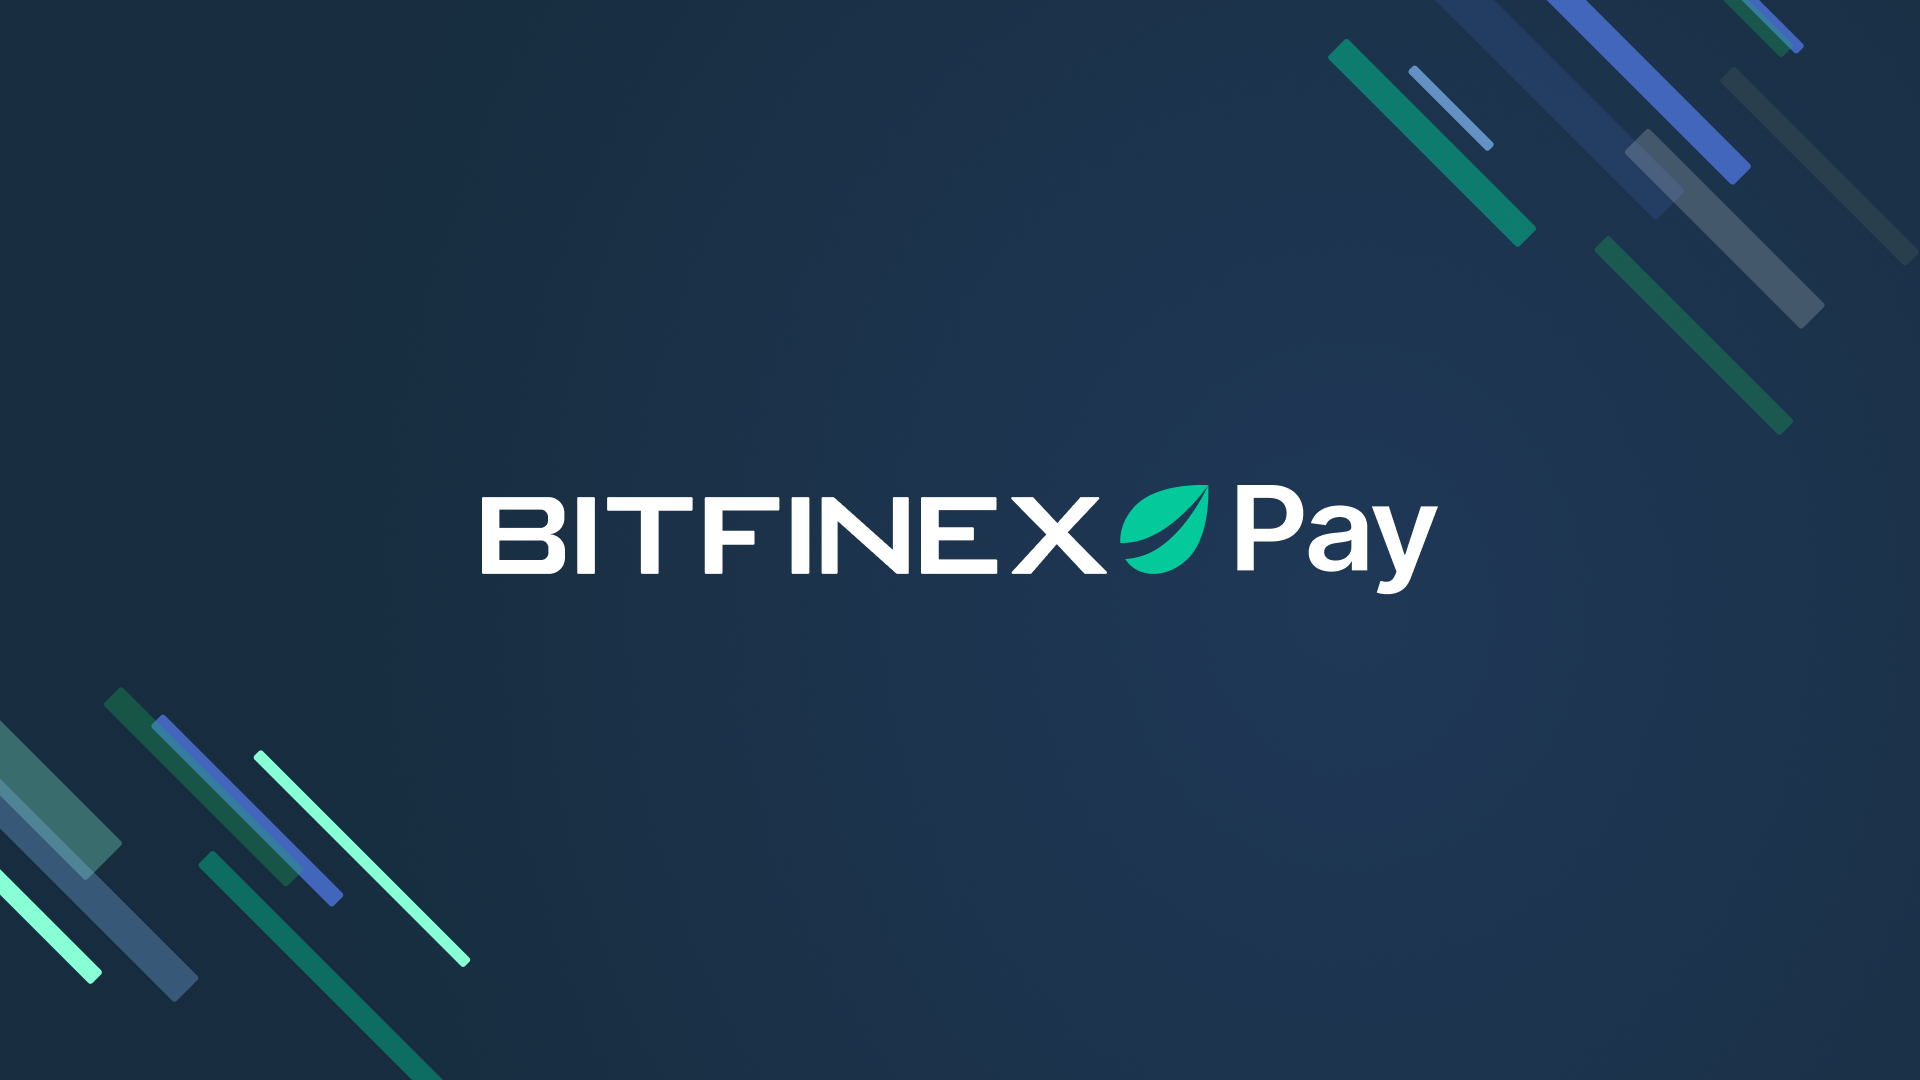 Bitfinex Pay launches as a cryptocurrency payment system ...